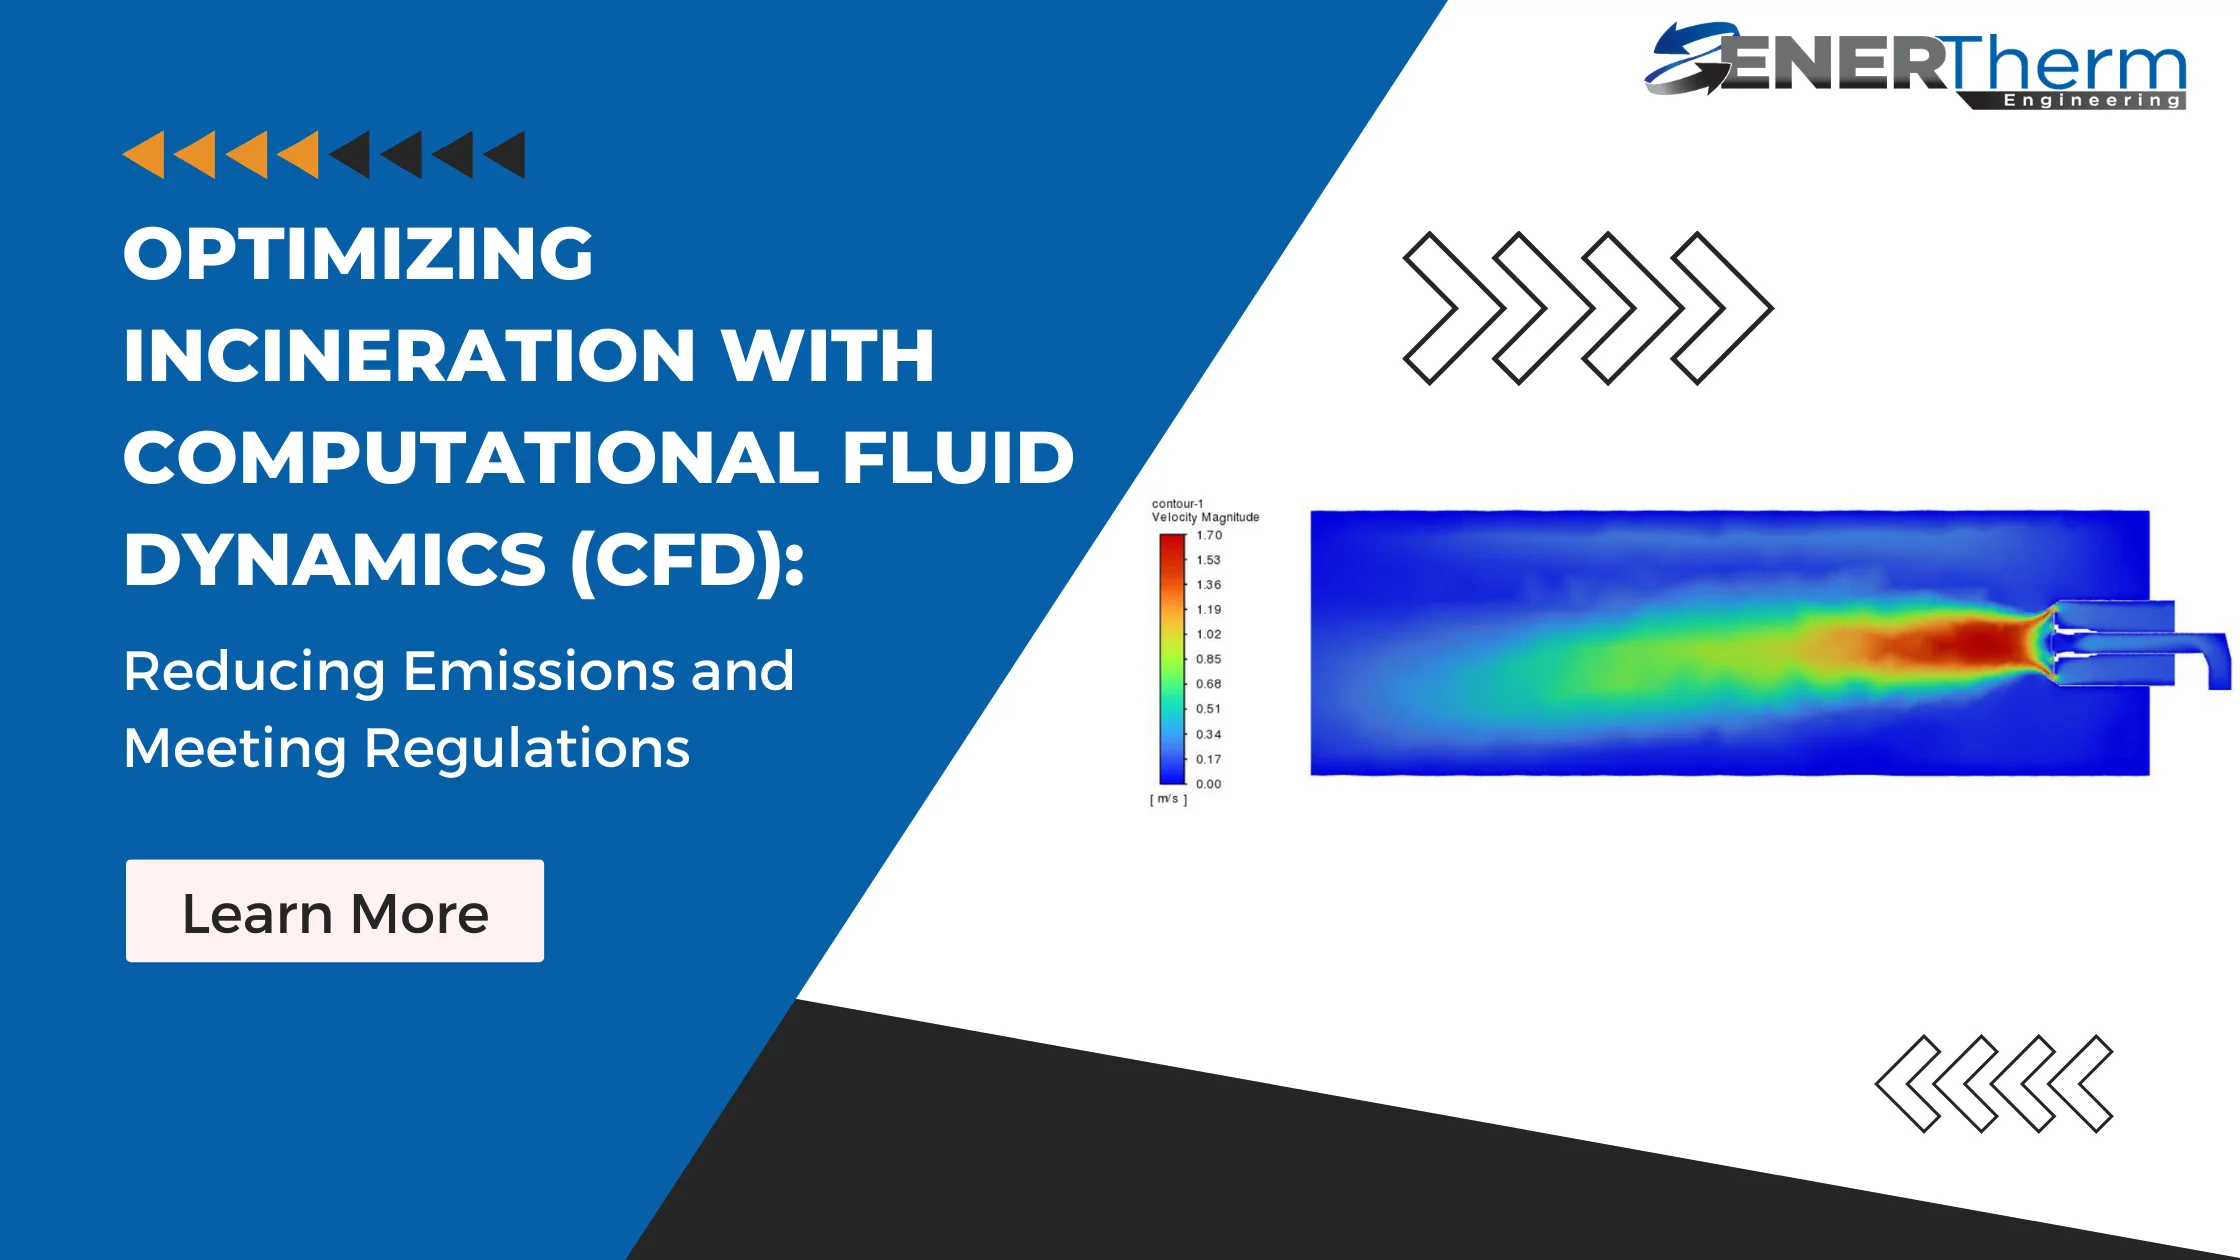 Optimizing Incineration with Computational Fluid Dynamics (CFD) Reducing Emissions and Meeting Regulations